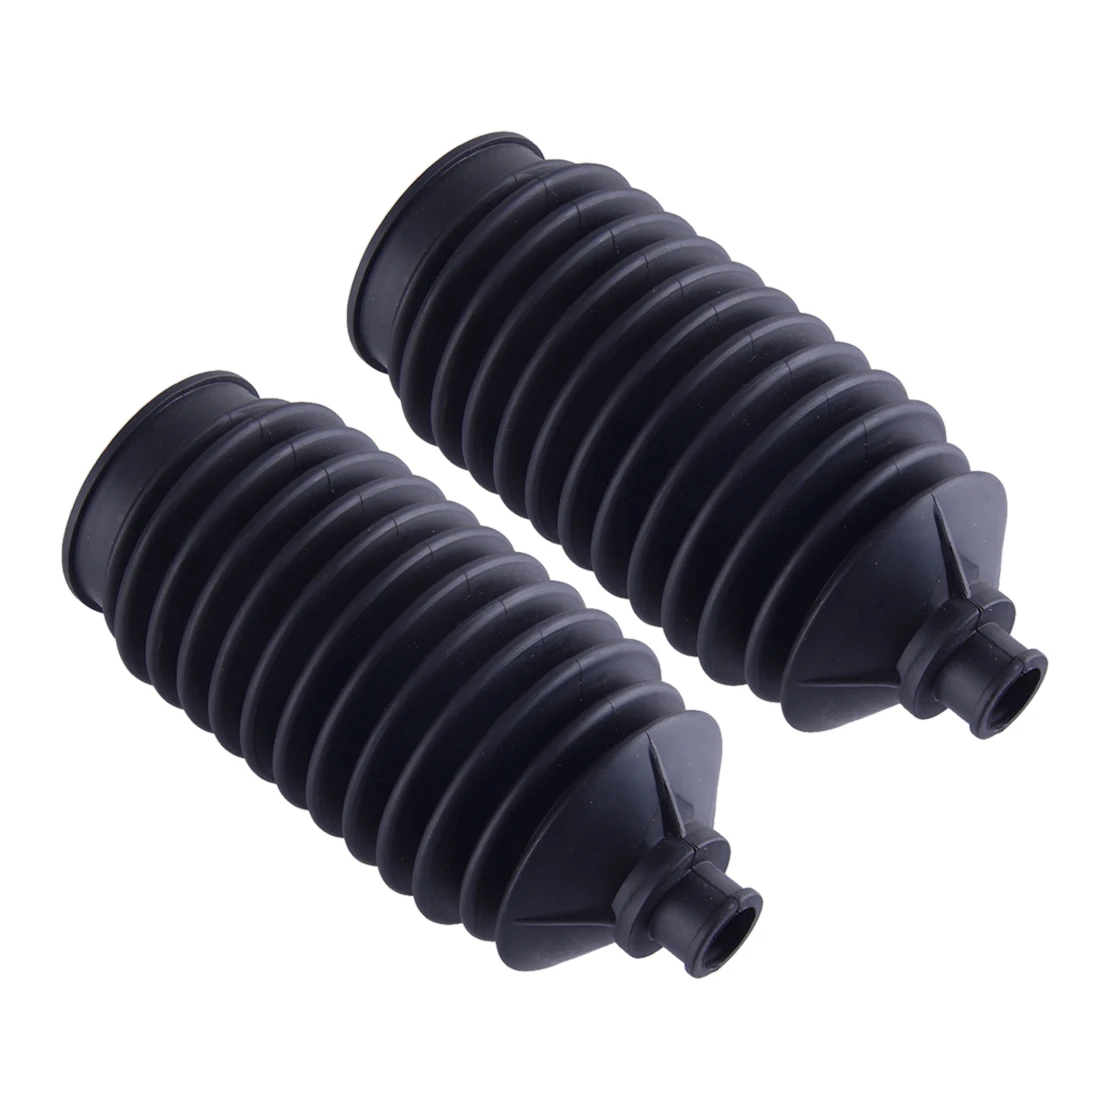 

2pcs Black Rubber Steering Bellows Long Rack Dust Boot Fit for Golf Cart Club Car DS 1984 1985 1986 1987 1988 1989-1996 1013035